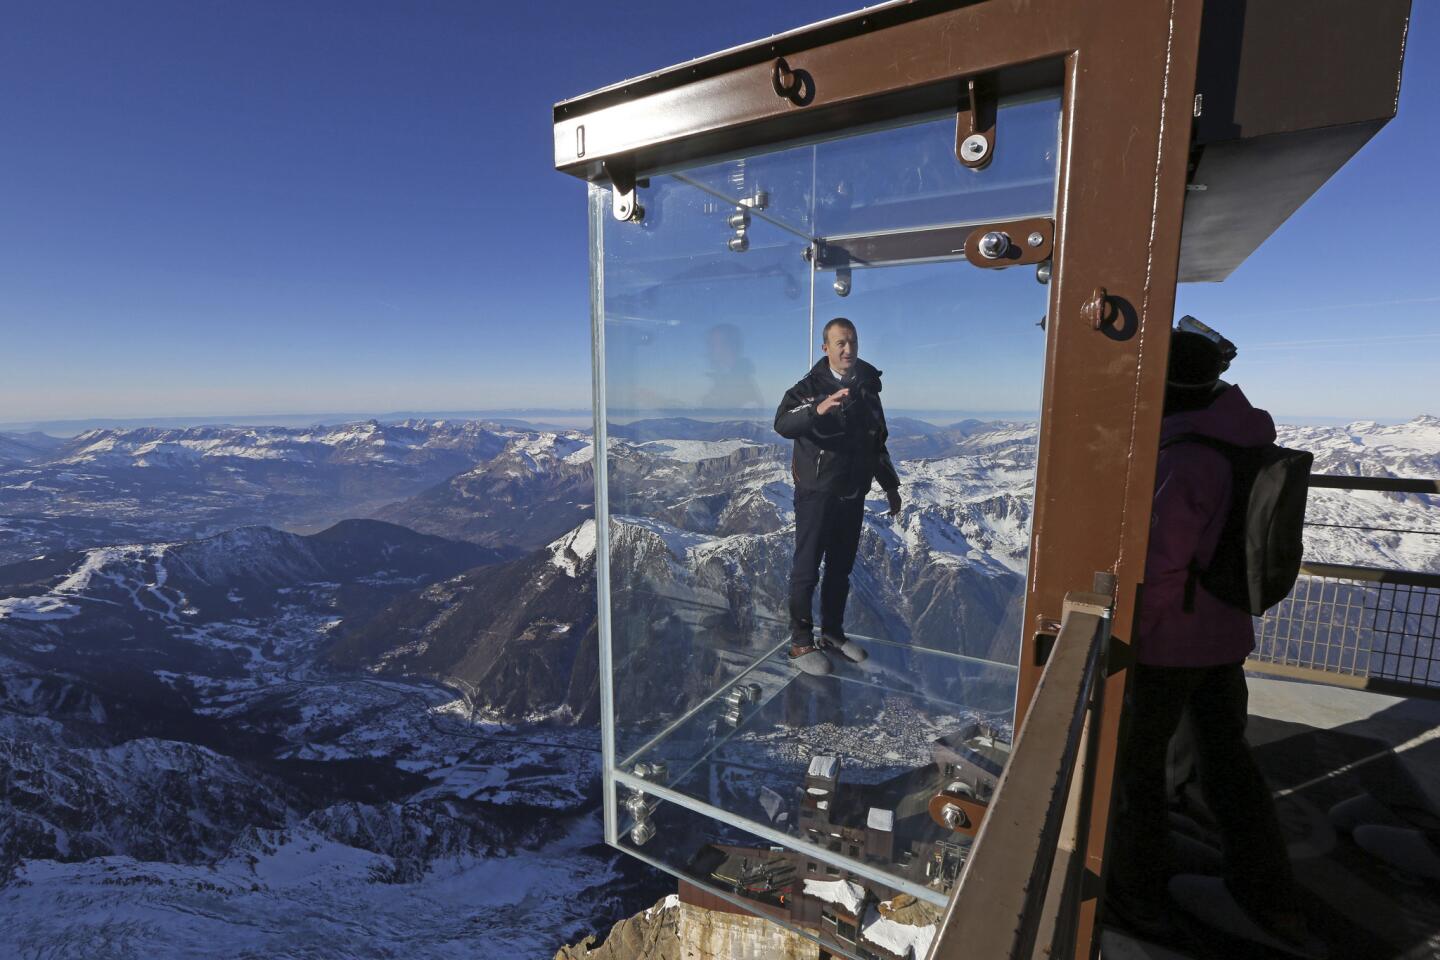 This one's not for people with a fear of heights: A French tourism company has suspended a glass cube with a see-through bottom from a peak in the Alps, offering a breathtaking view some 3,000 feet down. Mathieu Dechavanne, head of the Compagnie du Mont Blanc which runs the new attraction, stands in a glass cage named "Pas dans le Vide" or "Step into the Void" at the top of the Aiguille du Midi peak in the French Alps during a press visit.